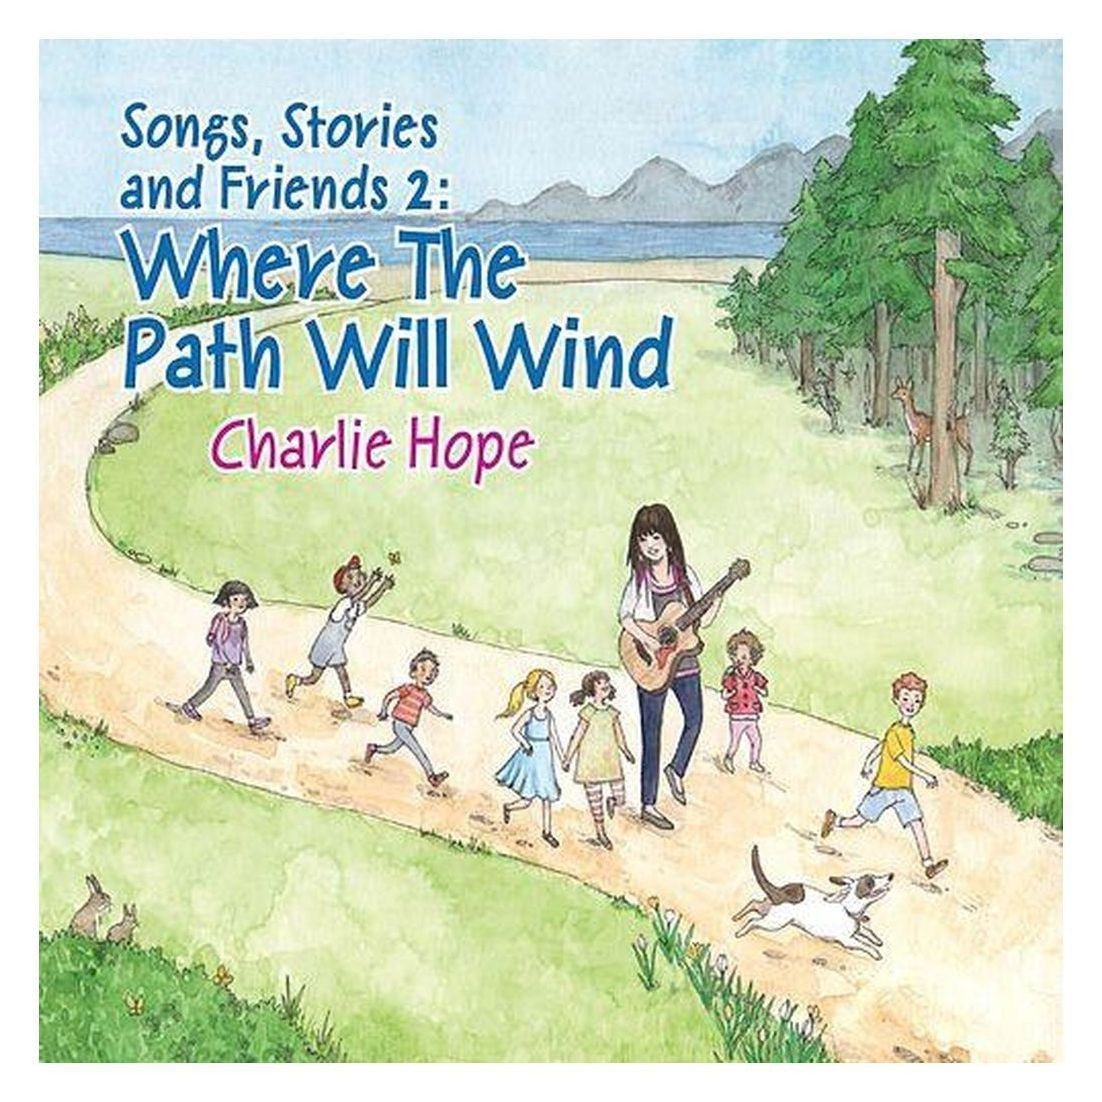 Songs Stories and Friends 2: Where the Path will Wind - challenge and fun natural toys